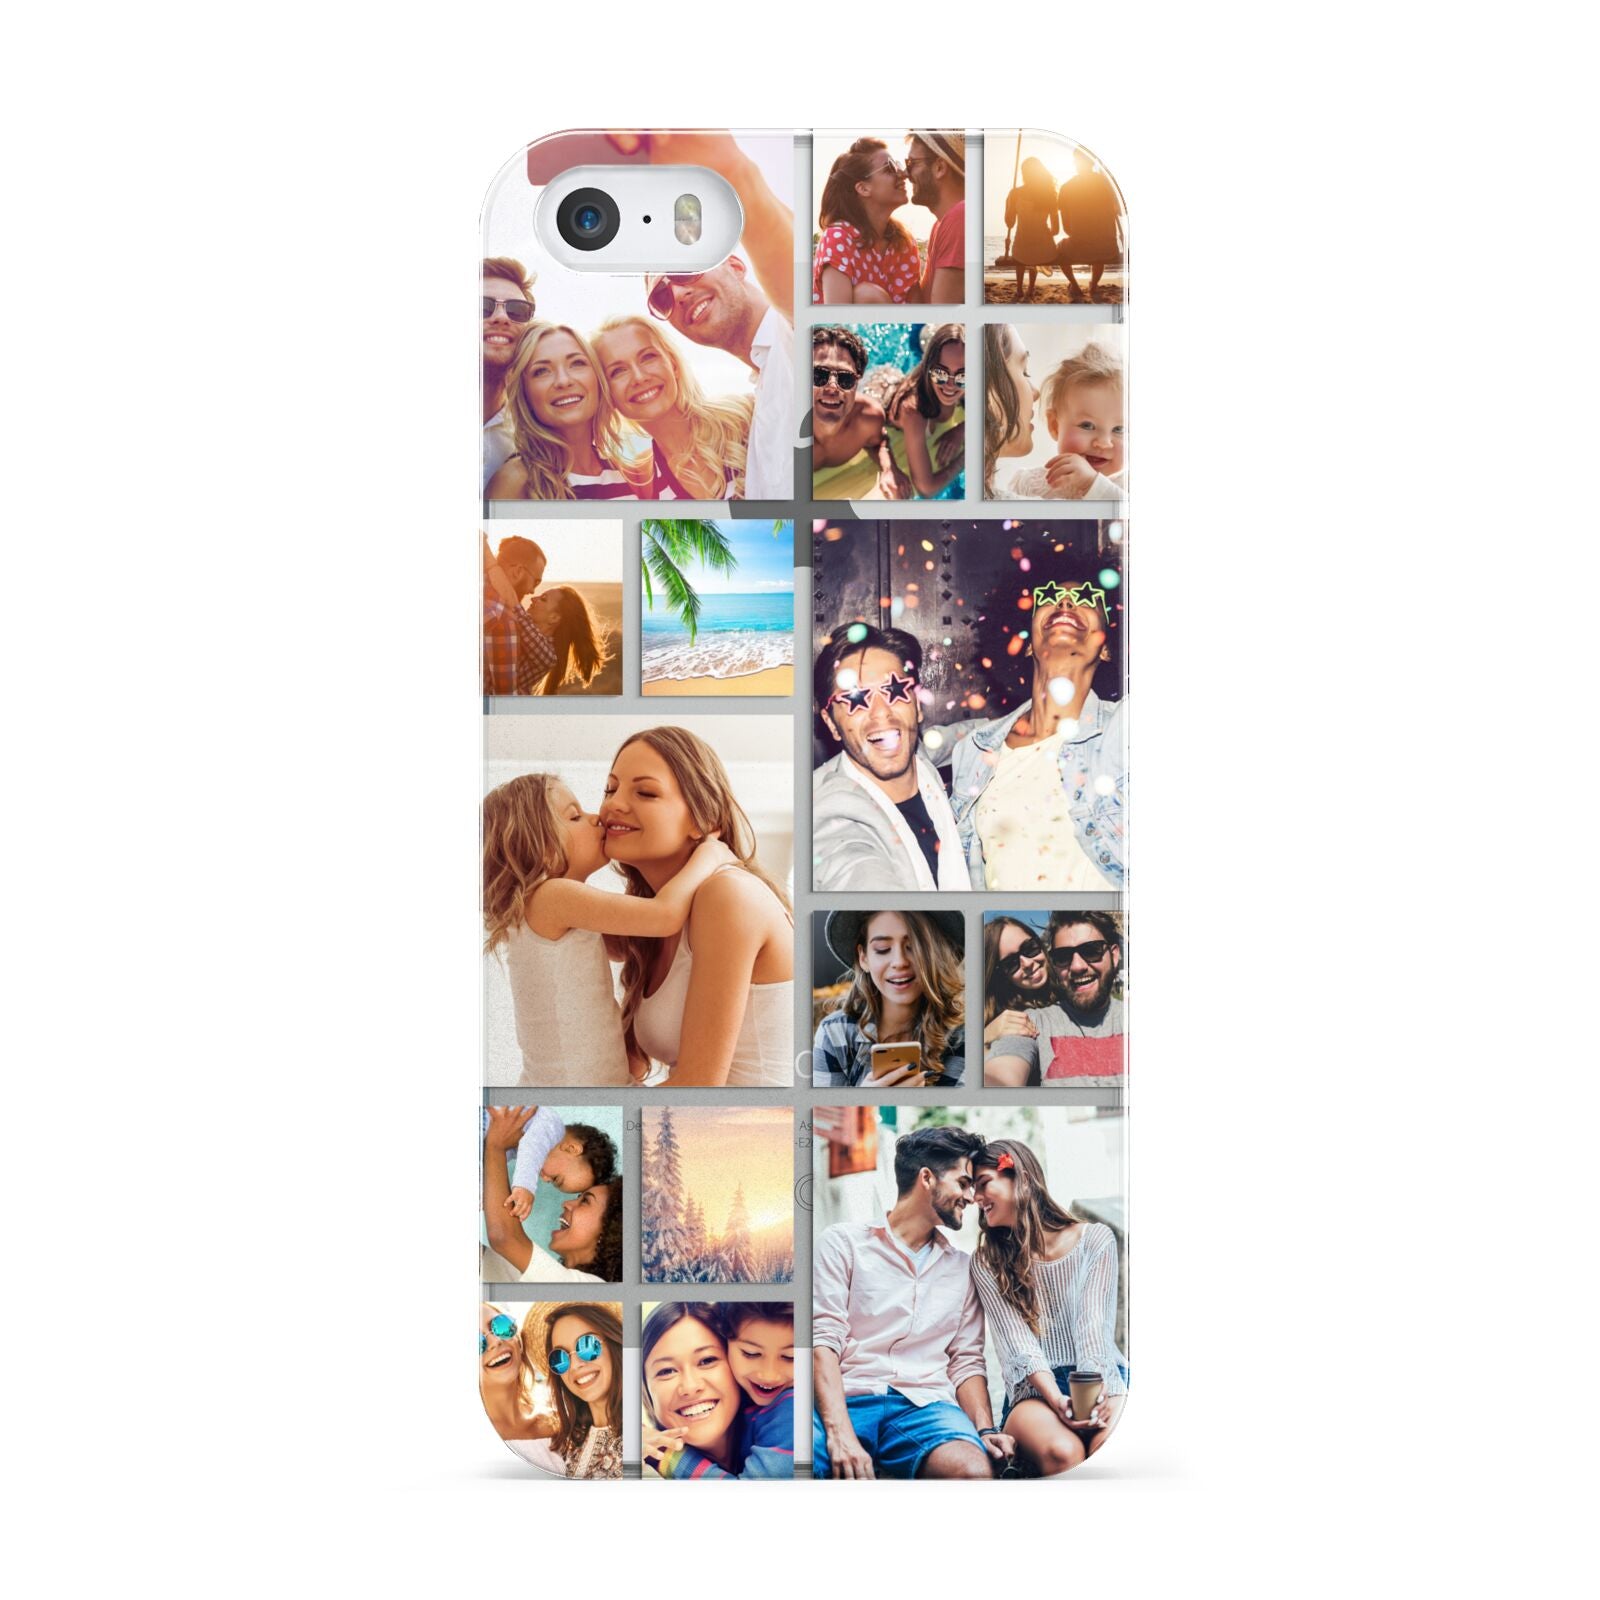 Abstract Multi Tile Photo Montage Upload Apple iPhone 5 Case